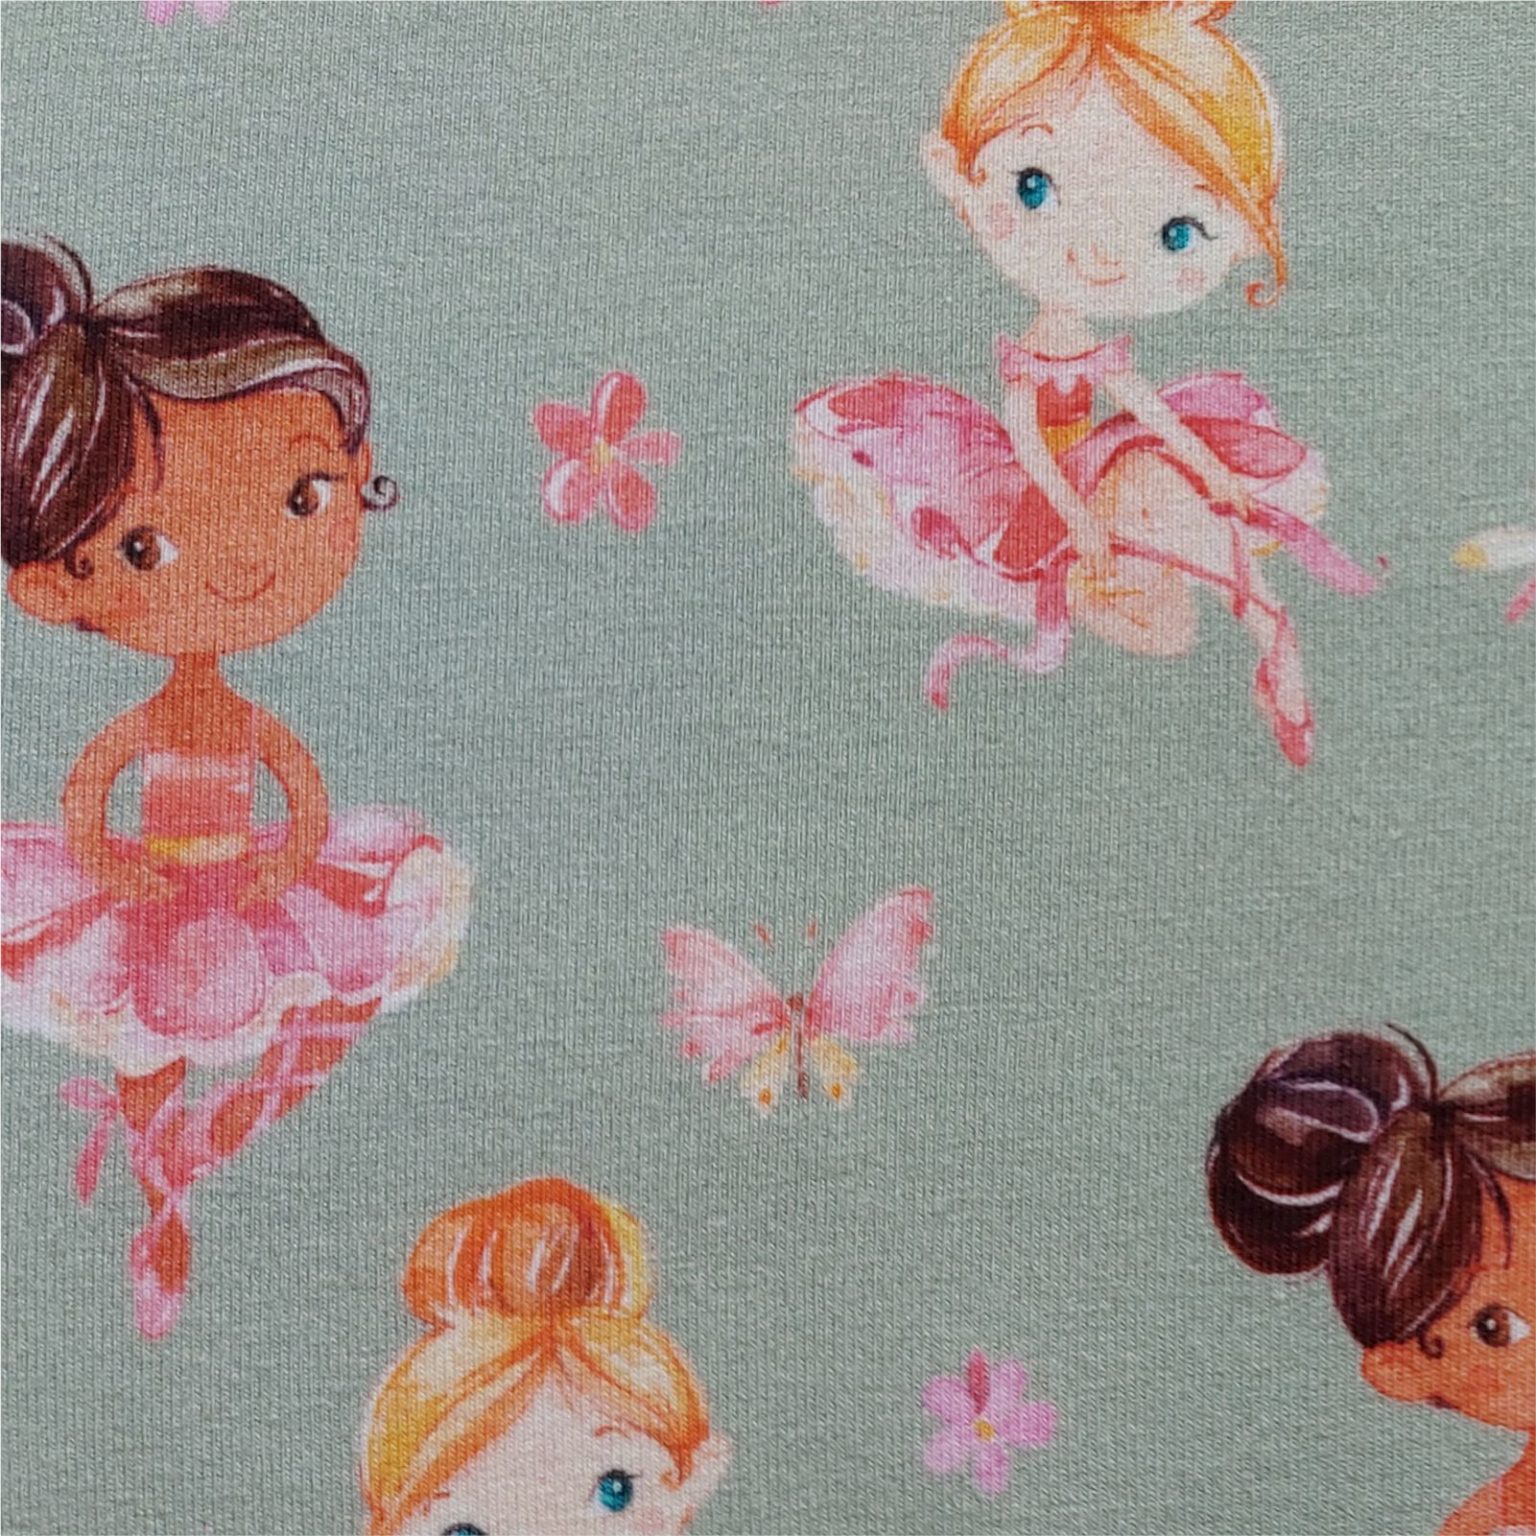 Little Girls Ballet Jersey Fabric at More Sewing